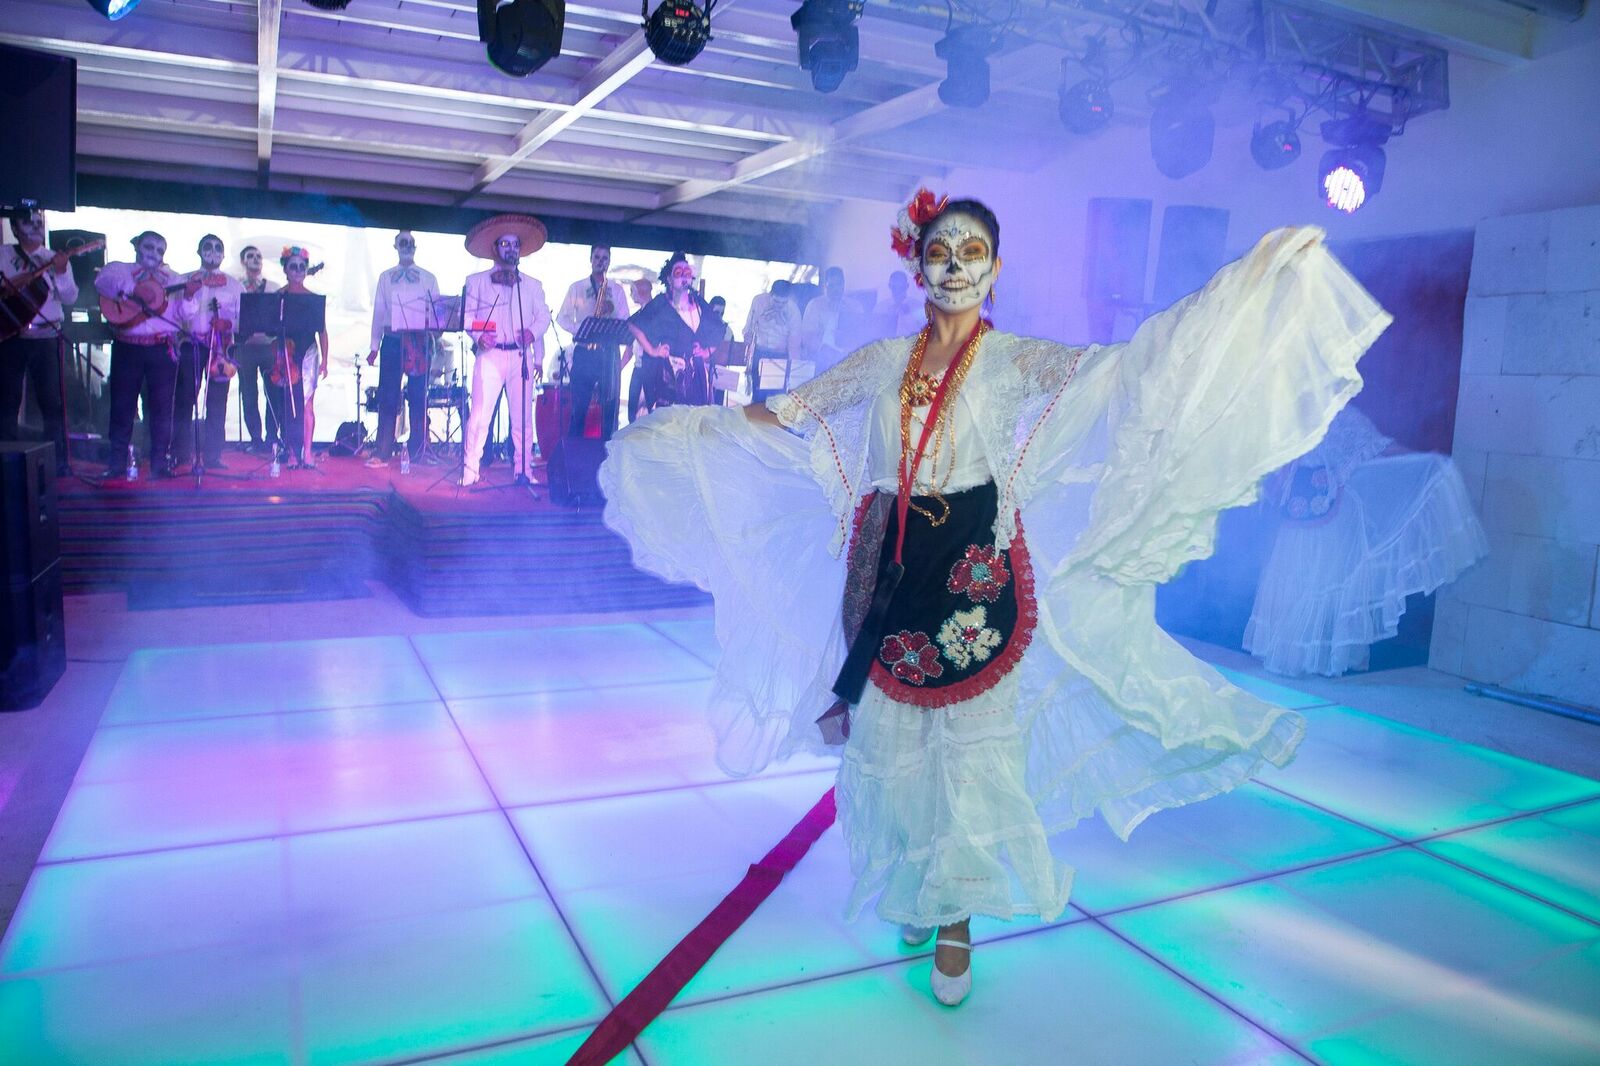 BlueBay Hotels honours Mexico with a party for more than 100 guests